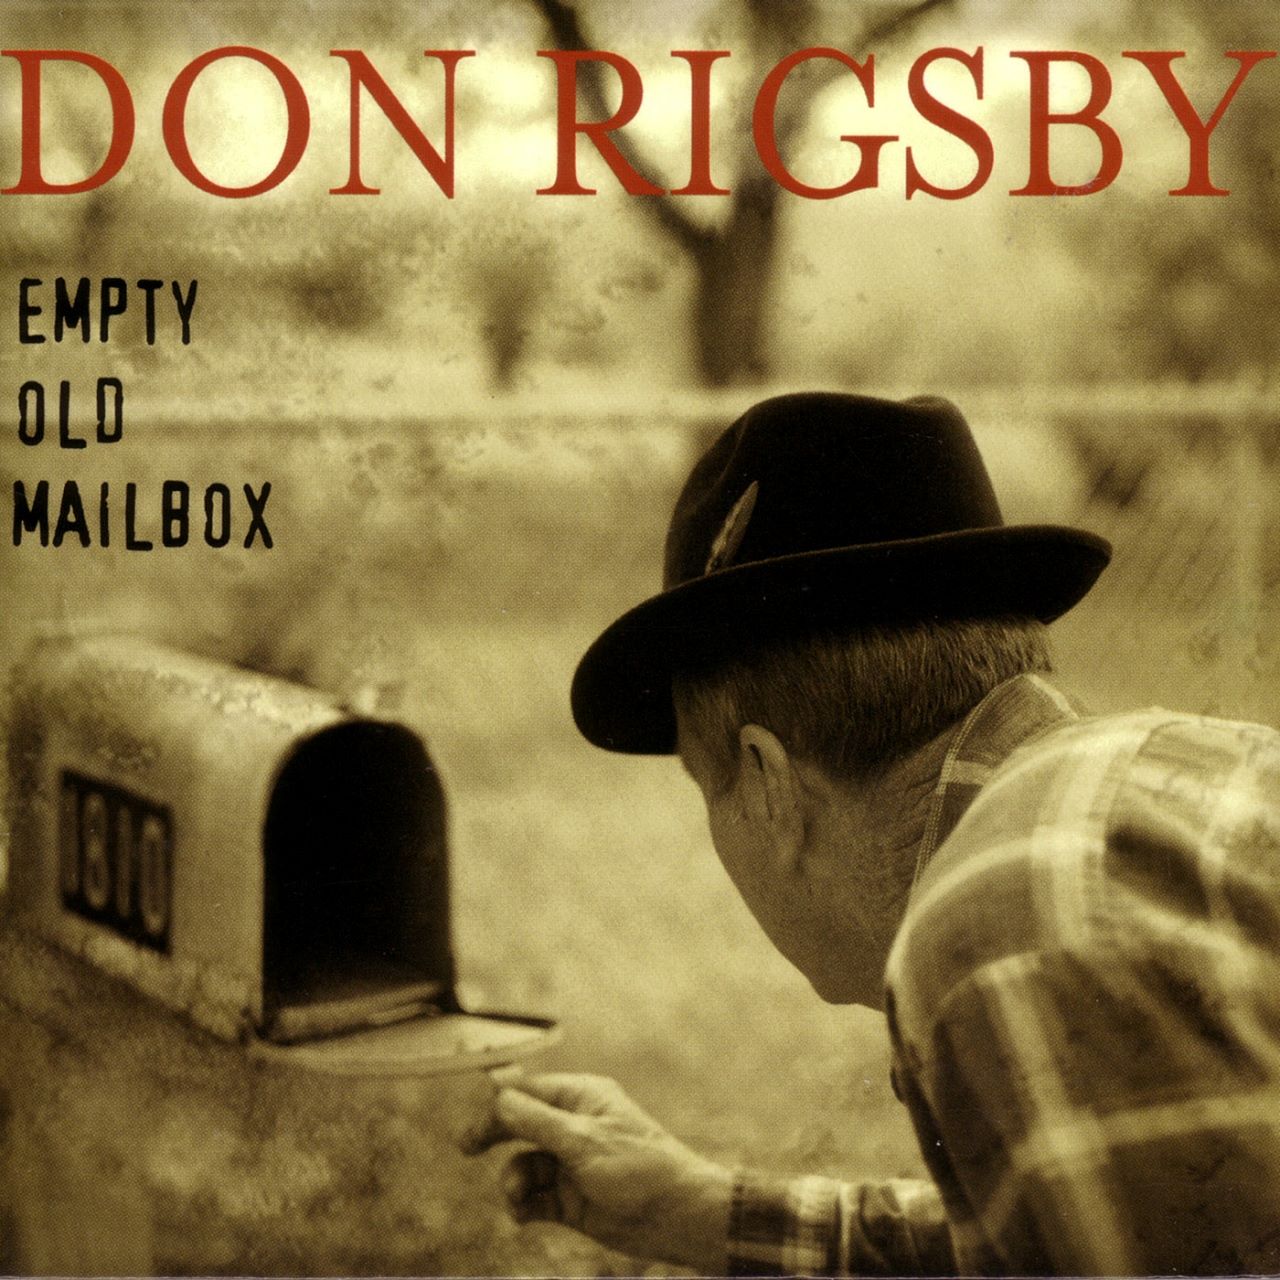 Don Rigsby - Empty Old Mailbox cover album